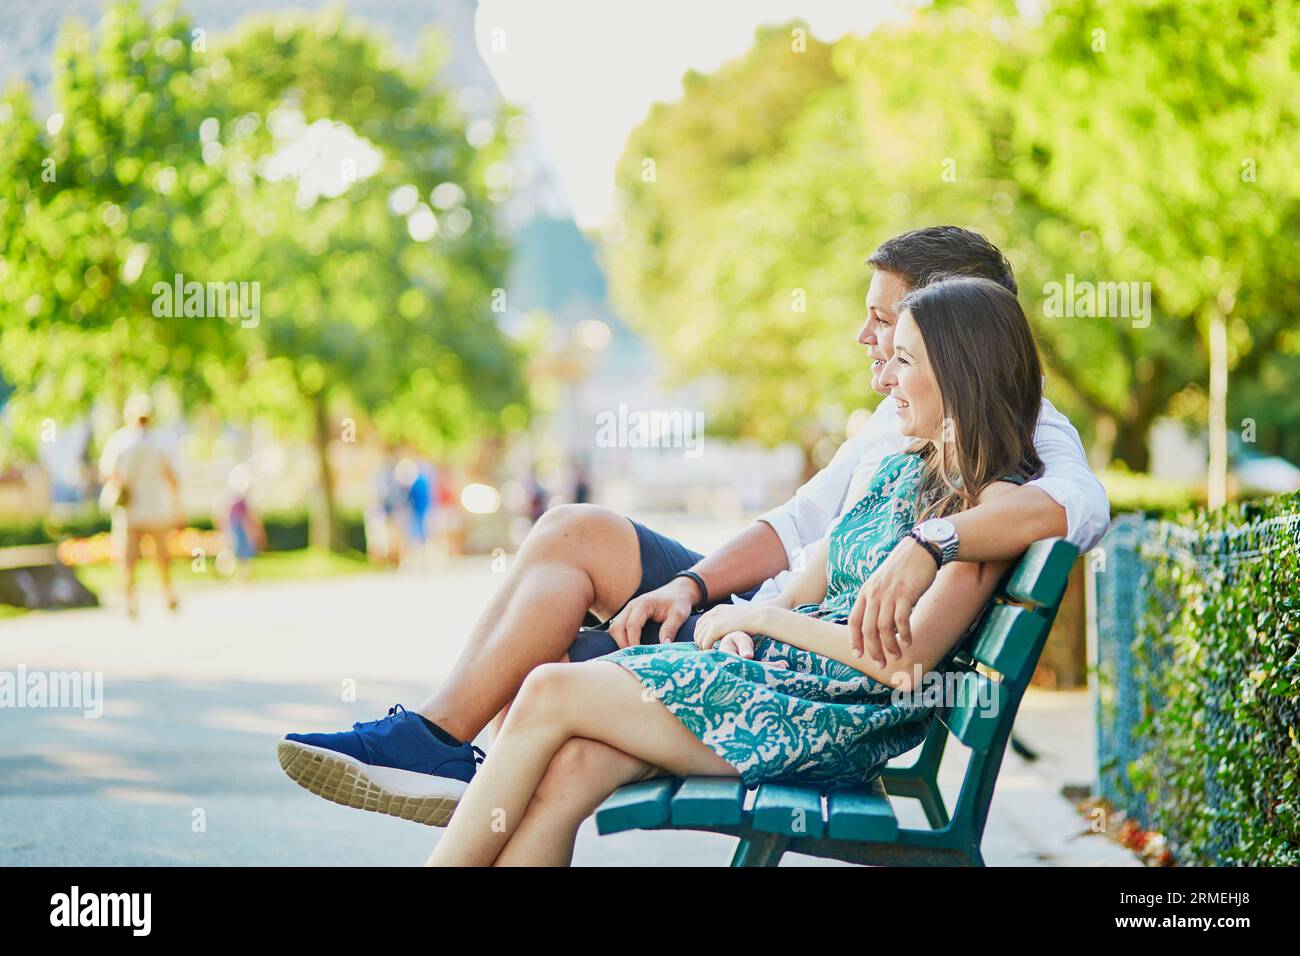 Happy dating couple hugging on a bench in a Parisian park near the Eiffel tower Stock Photo